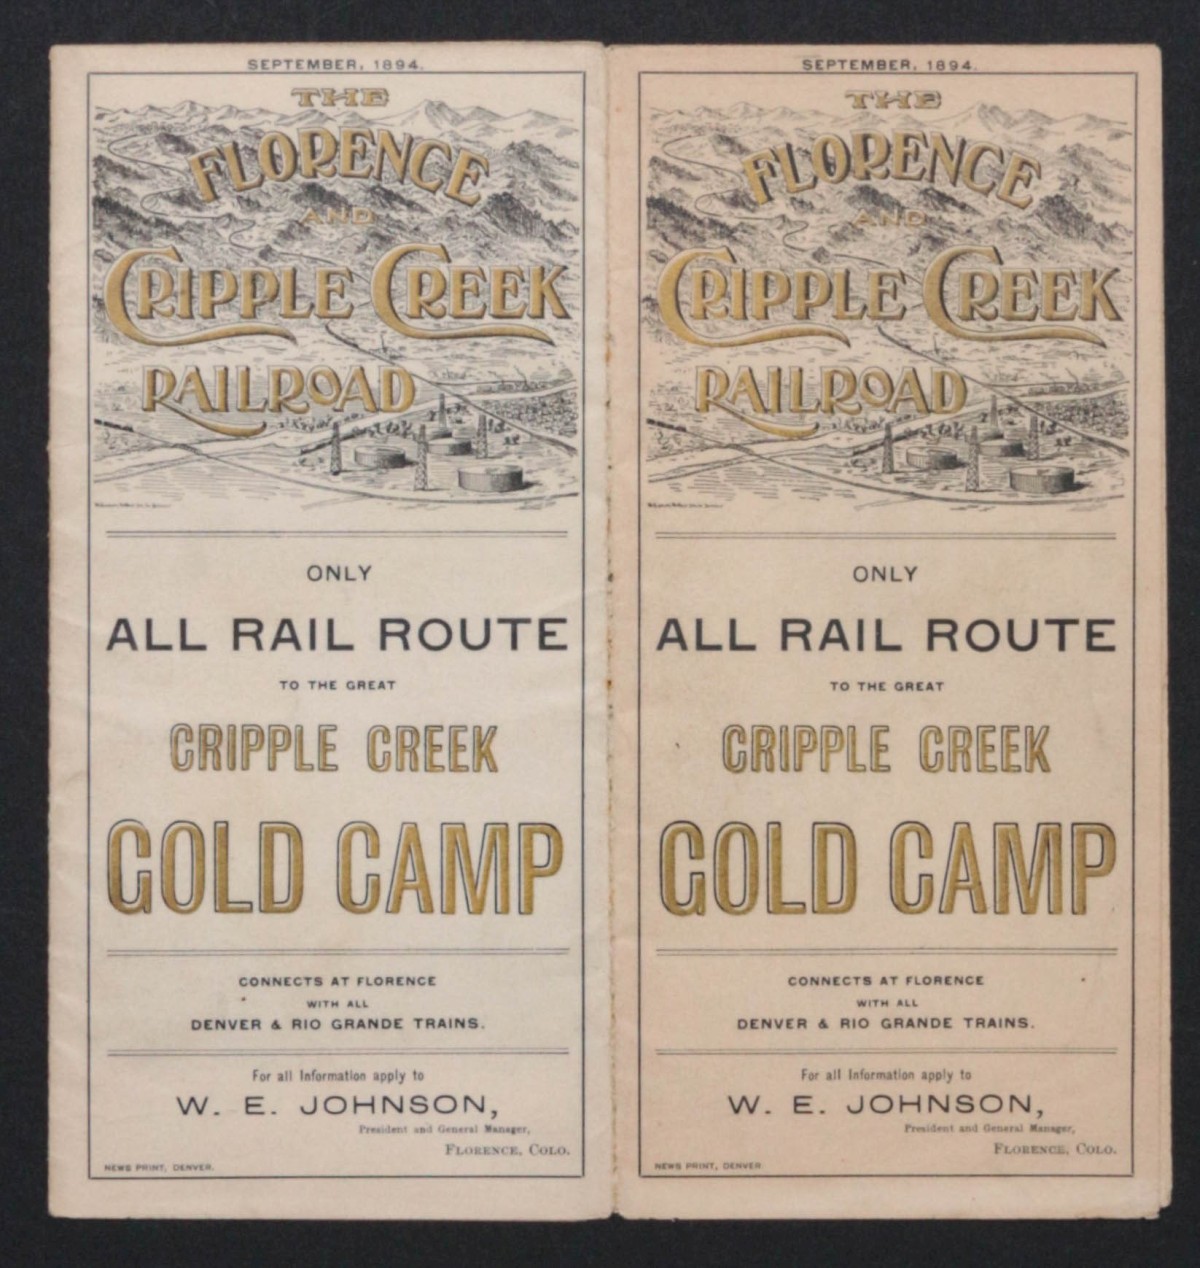 THE FLORENCE AND CRIPPLE CREEK RR TIMETABLE FOR 1894